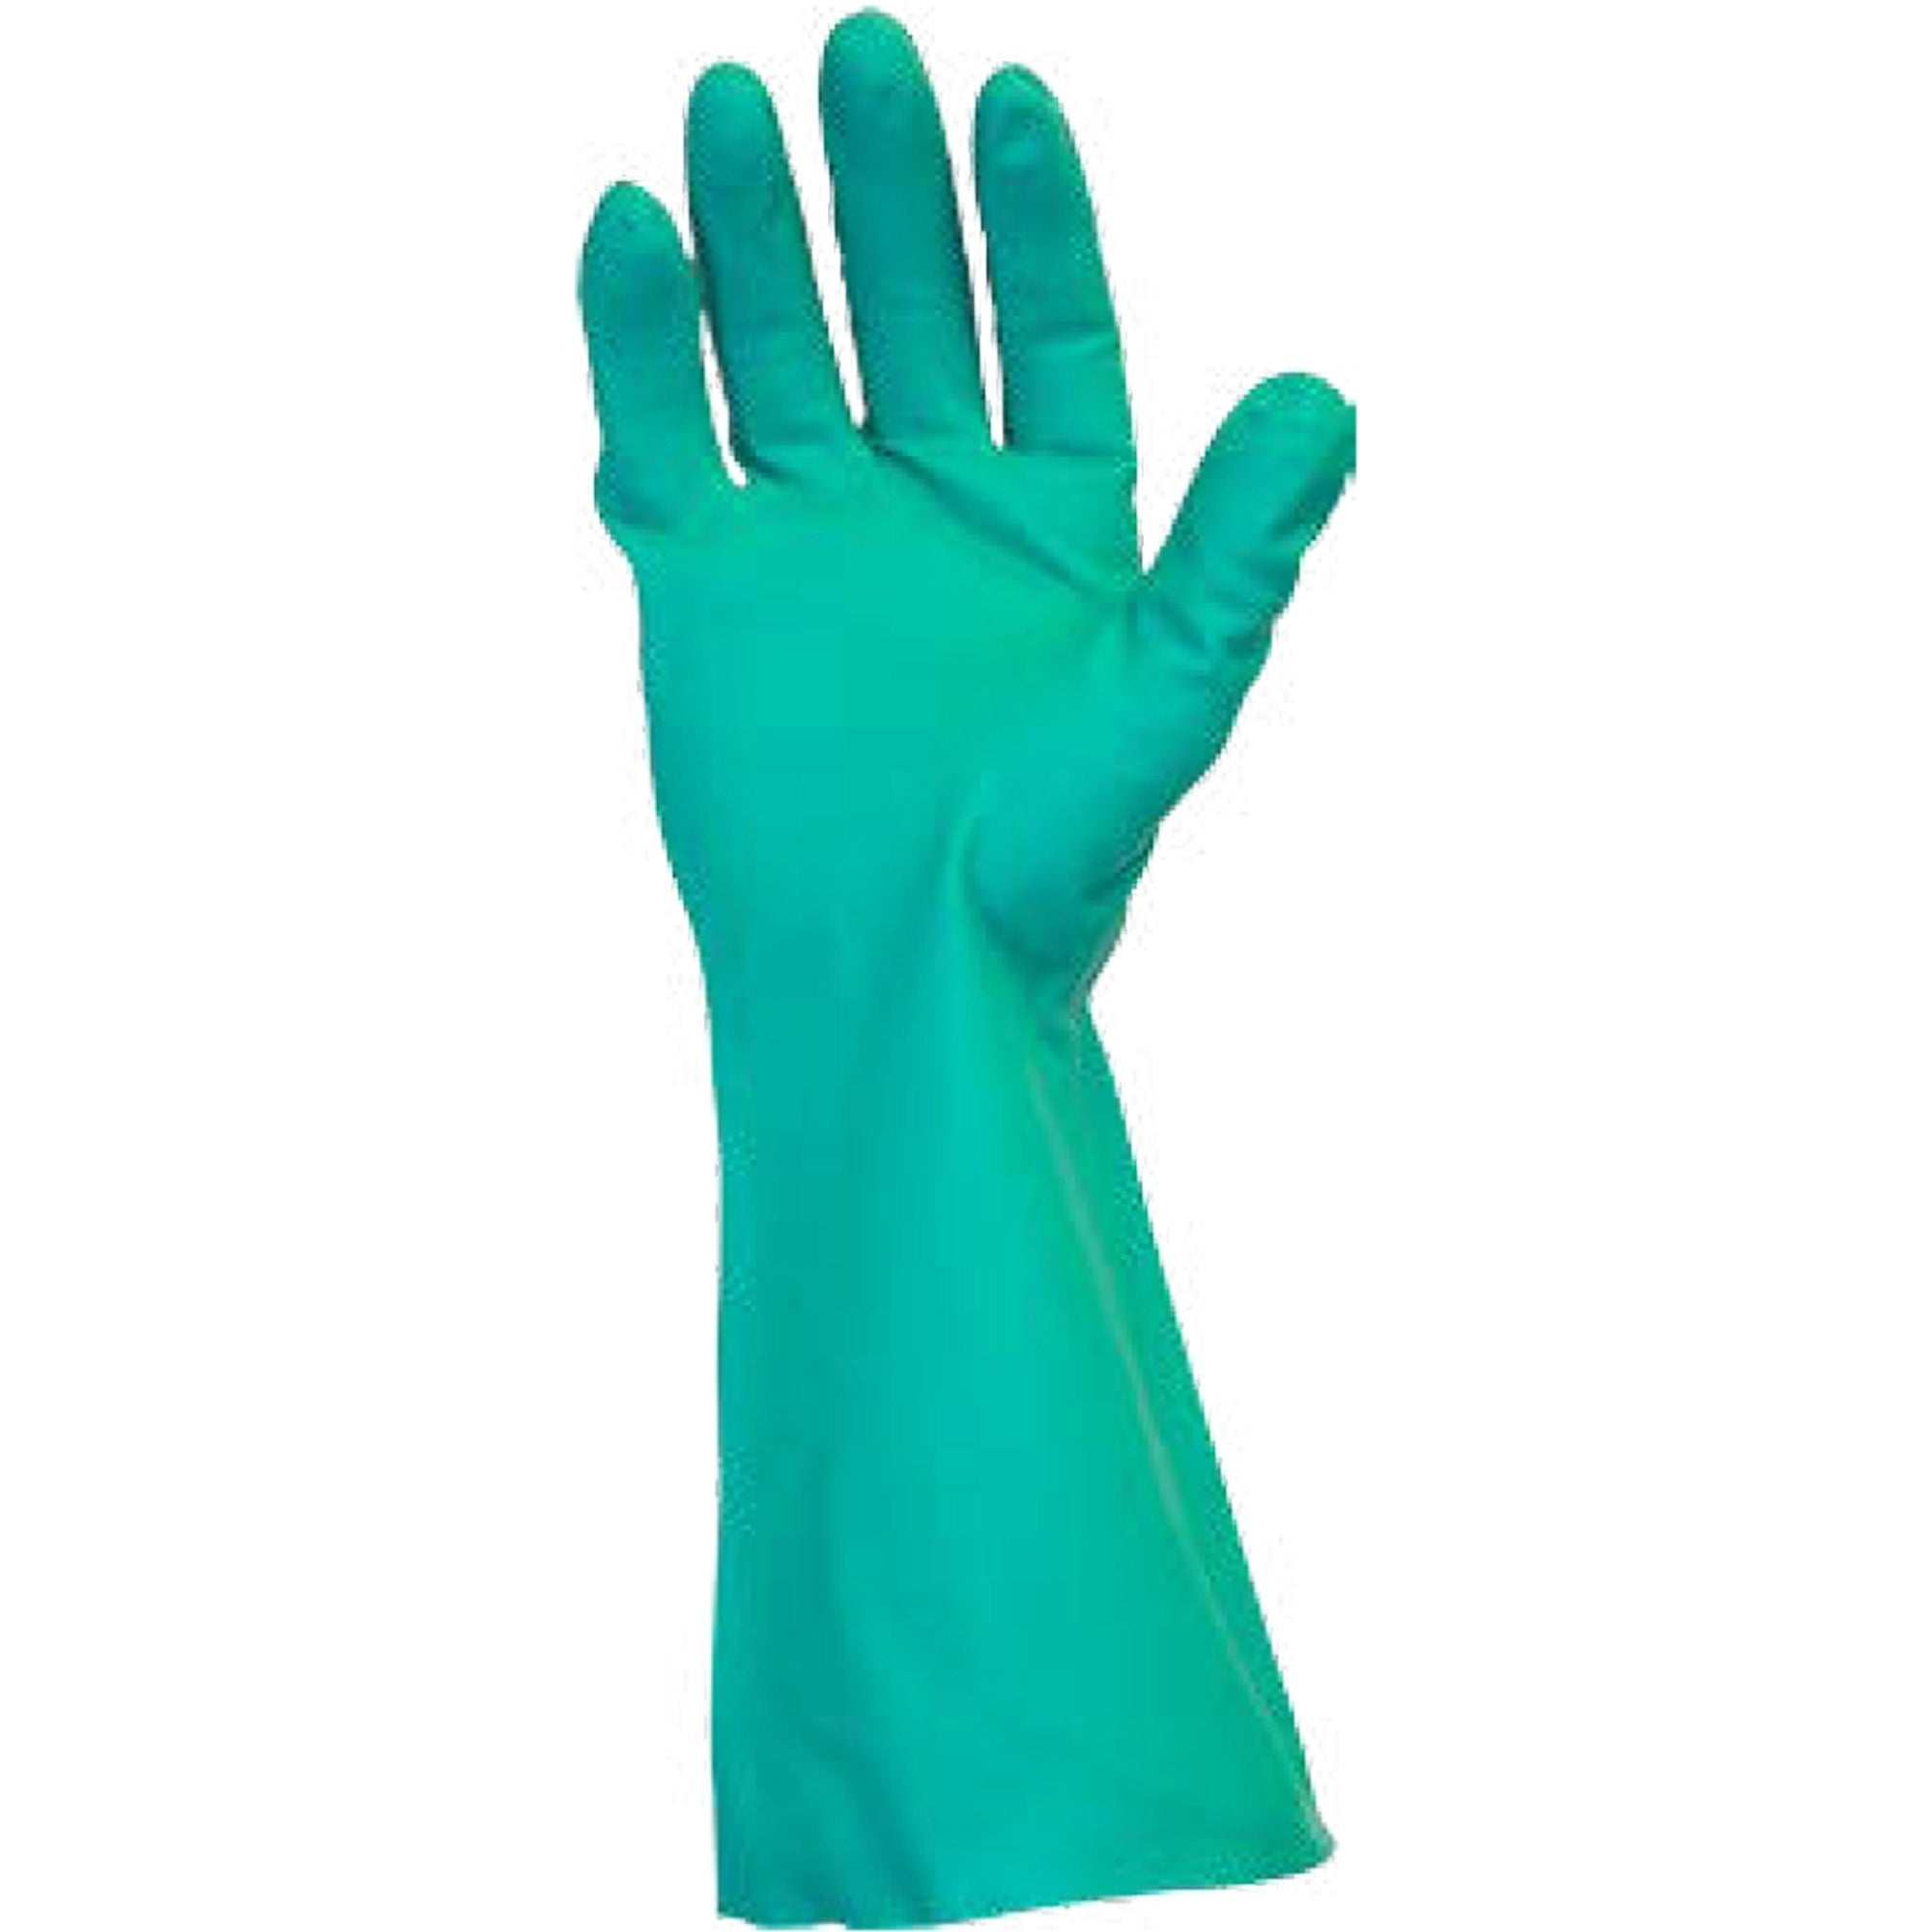 Safety Zone Green Flock Lined Nitrile Gloves - Chemical Protection - X-Large Size - Green - Raised Diamond Grip, Flock-lined - For Dishwashing, Cleaning, Meat Processing - 15 mil Thickness - 13" Glove Length